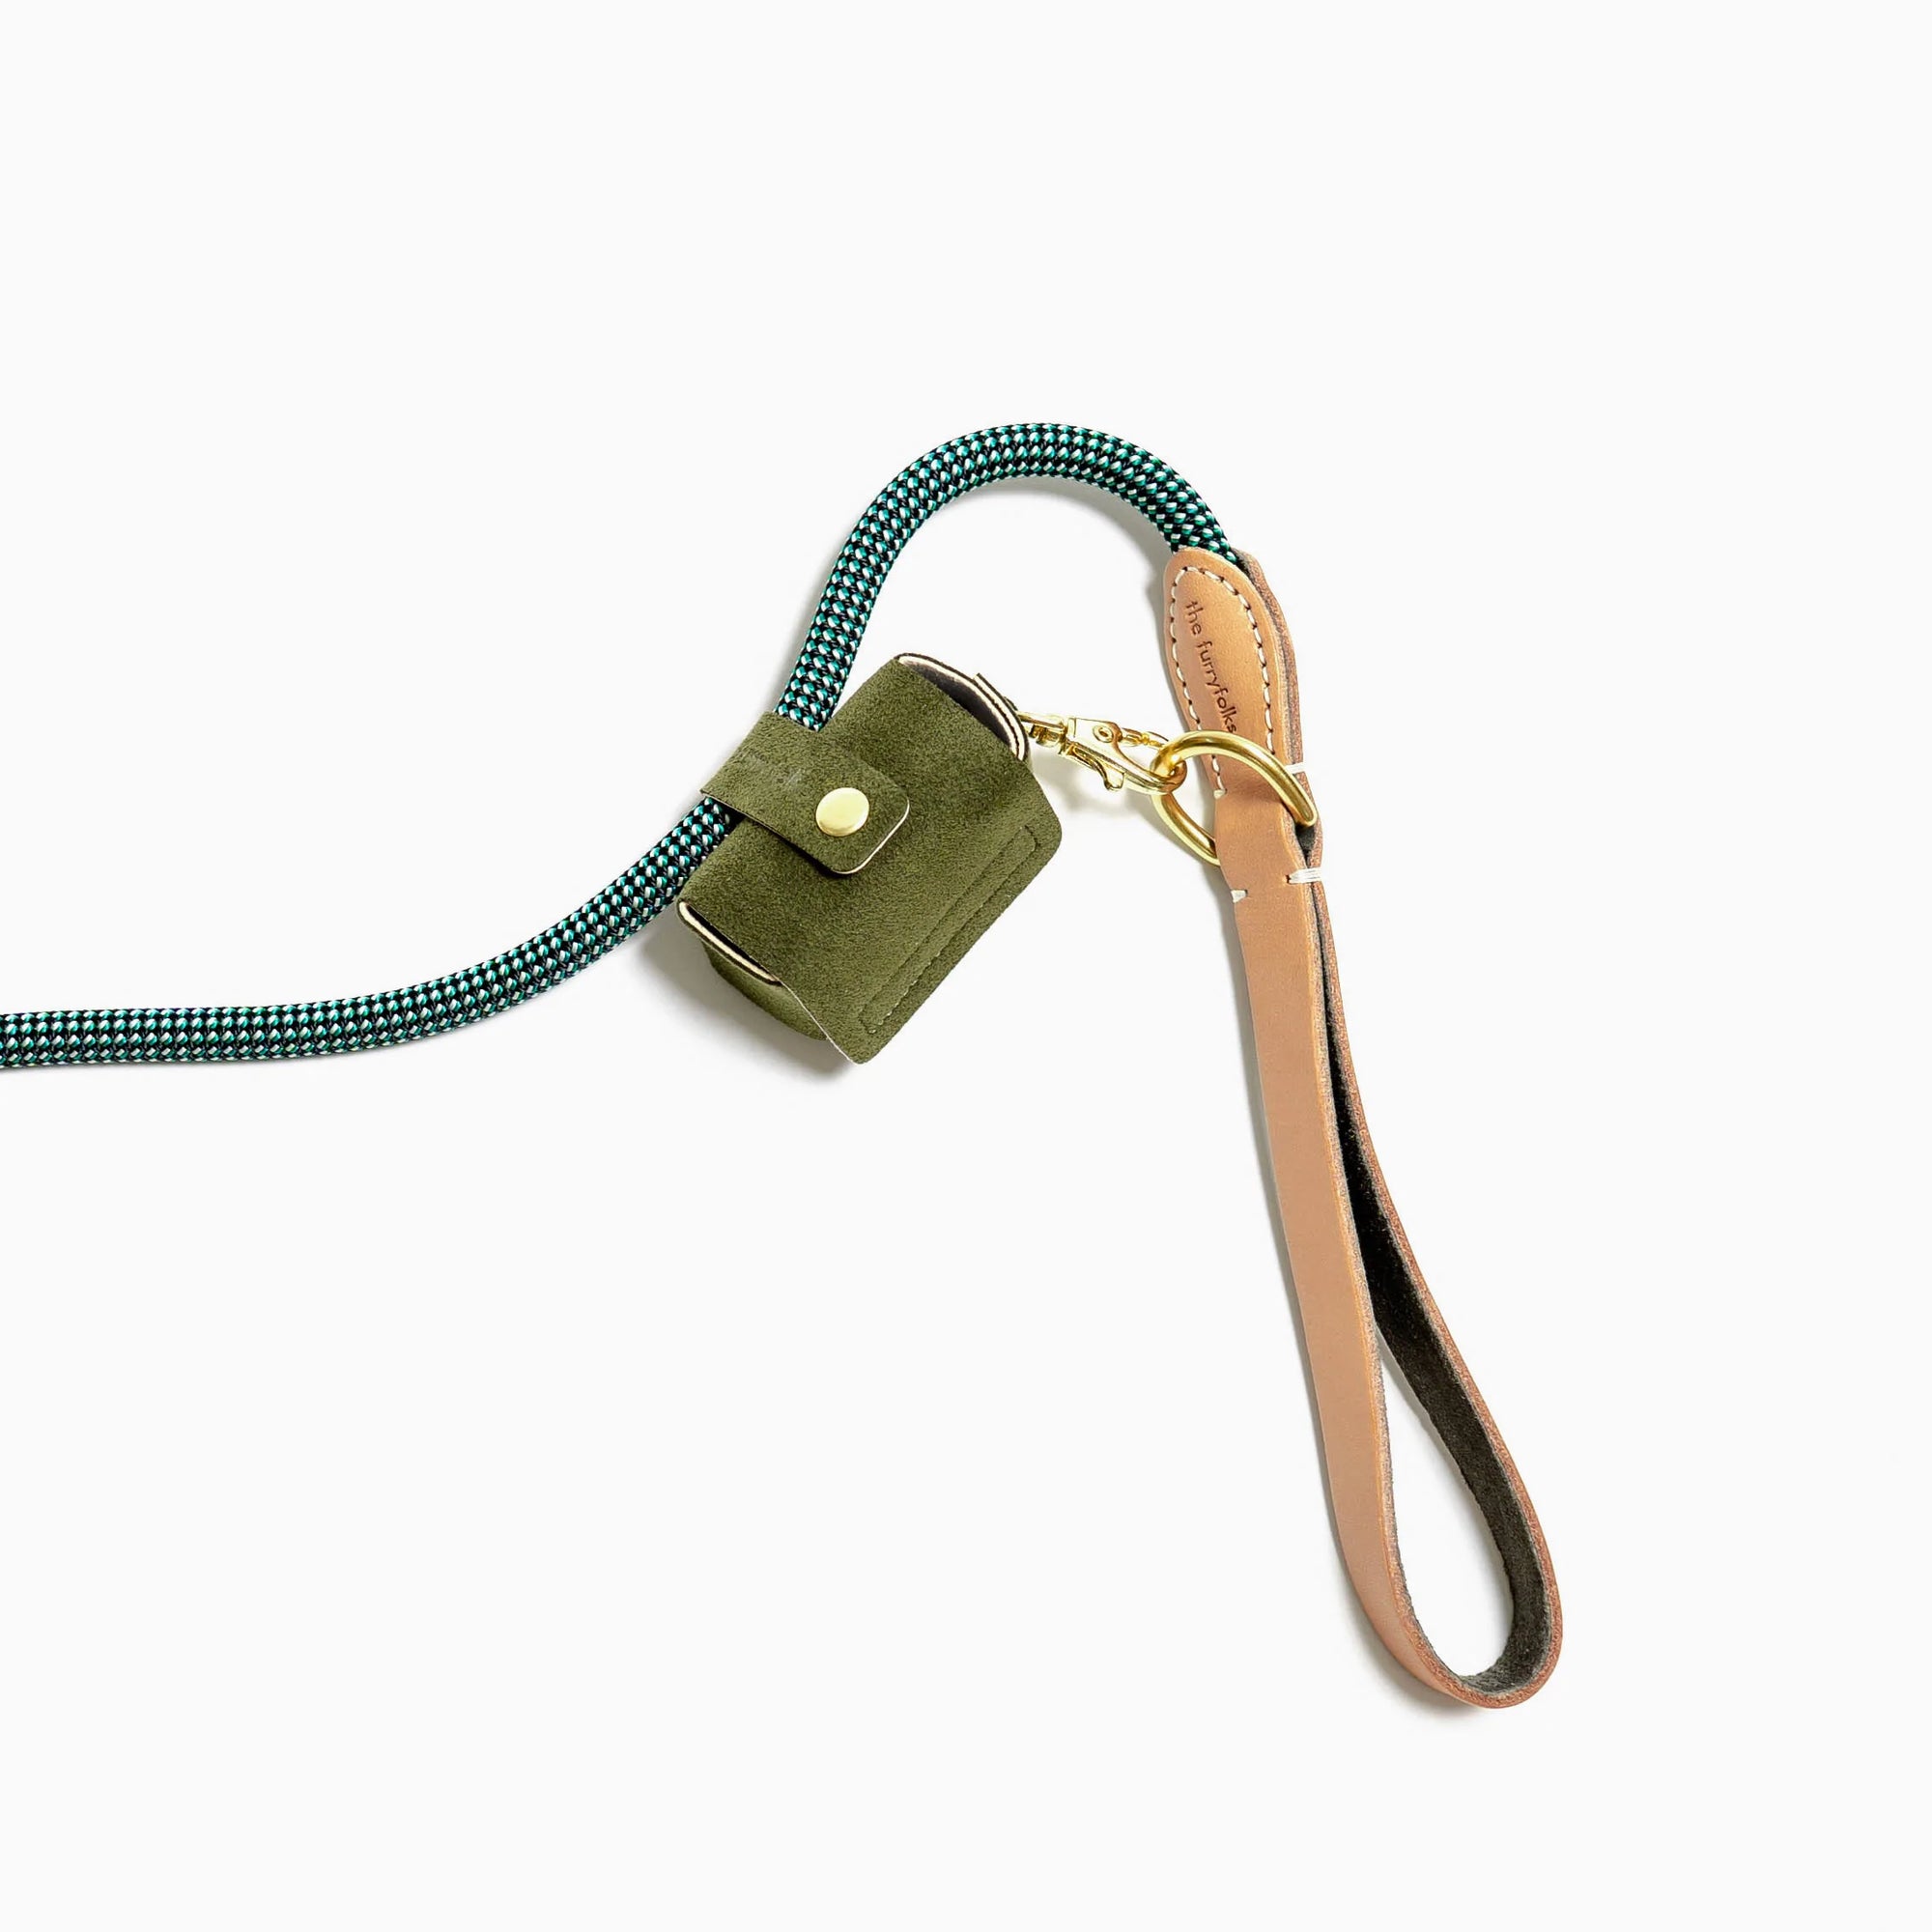 a dog leash with a green fabric poop bag holder attached to it. The holder, which matches the ones previously shown, is affixed to the leash via a golden clip, demonstrating its practical use. It is accompanied by a leather strap, adding an element of style to the functionality. The poop bag holder's design ensures that dog walkers can conveniently carry bags for cleaning up after their pets, illustrating the product in use. 